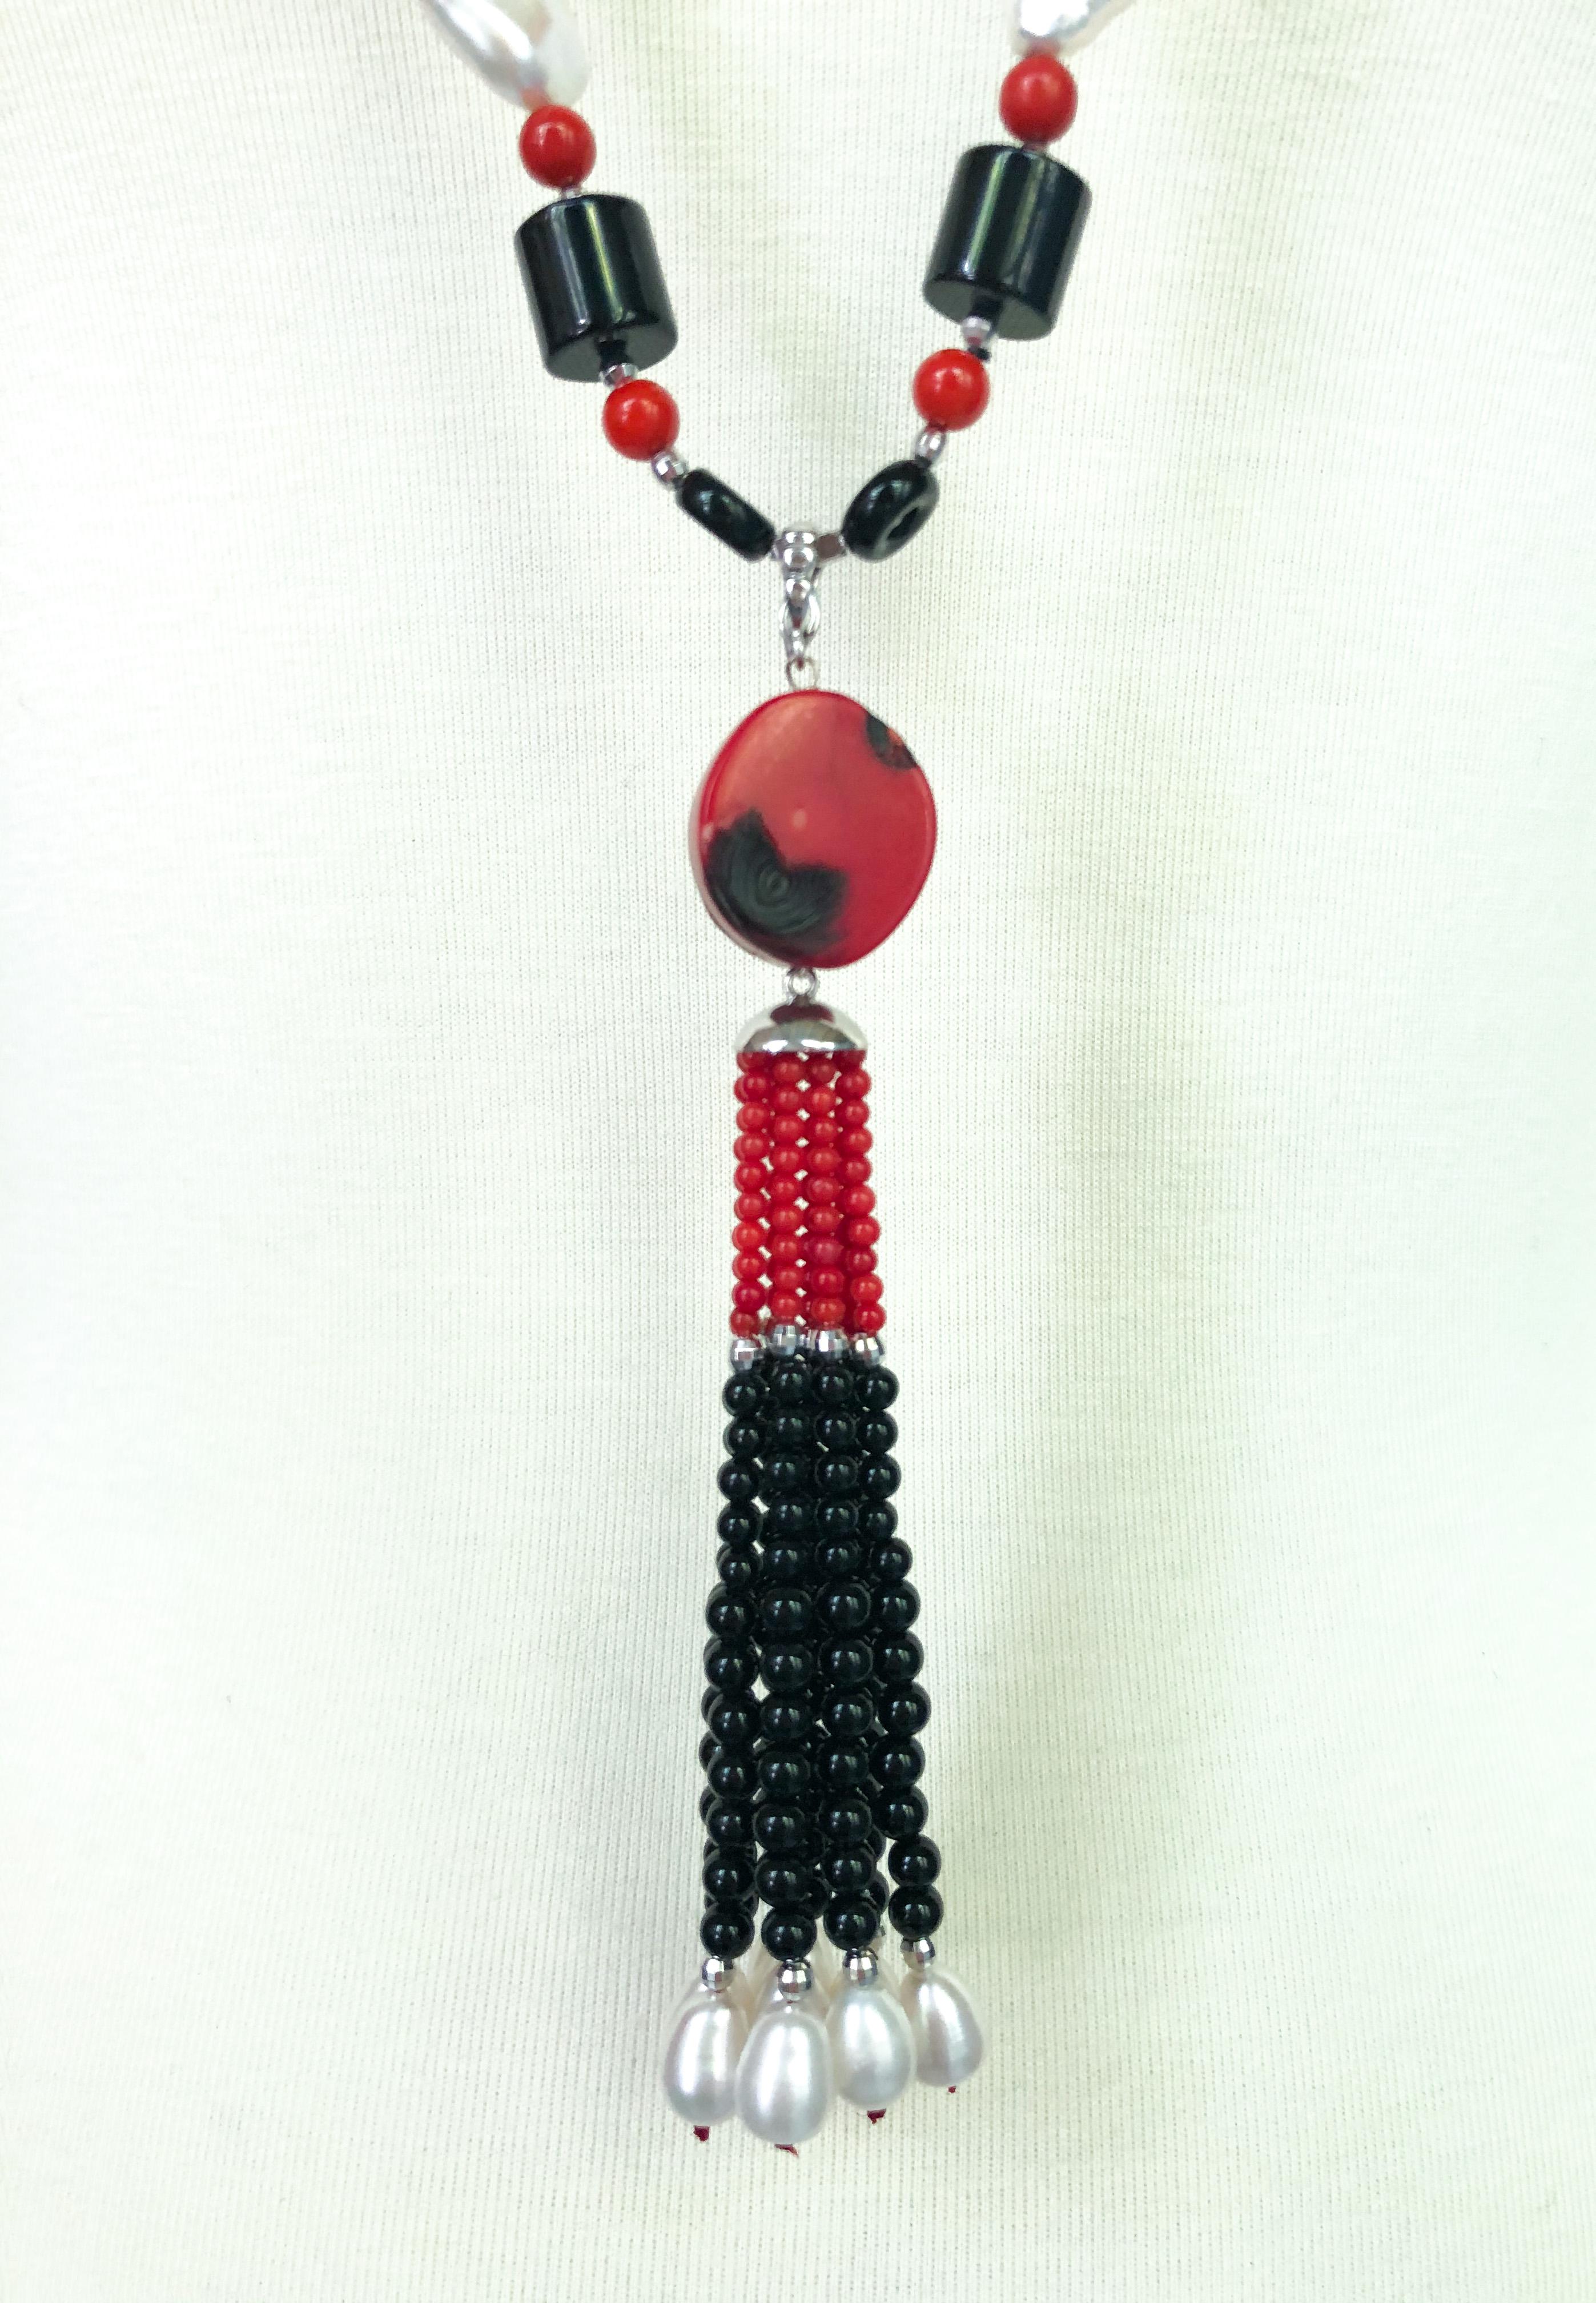 Marina J.'s unique art deco style necklace features a variety of shapes: sphere pearls, cylindrical onyx beads, coral teardrop beads, and more. This striking piece mimics jewelry from the roaring '20s with its symmetrical design and various